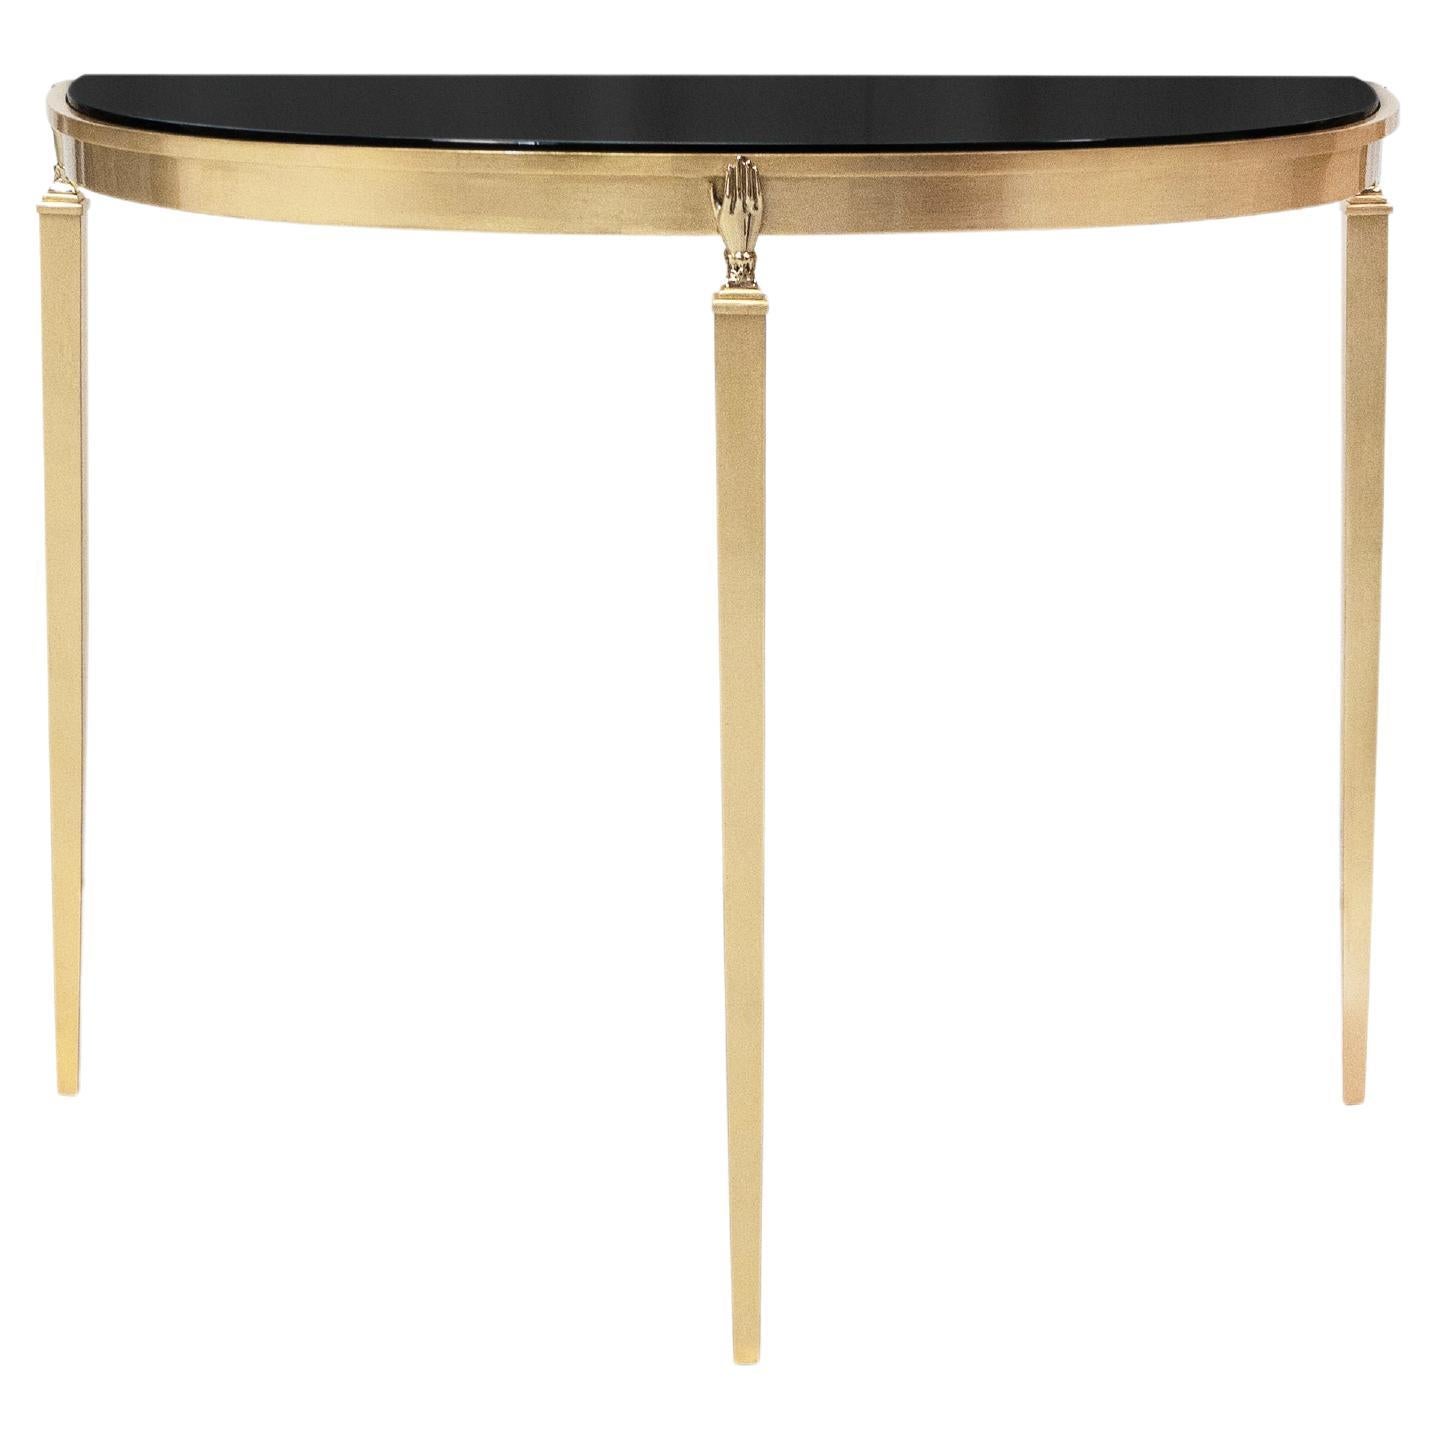 New And Custom Demi-lune Tables